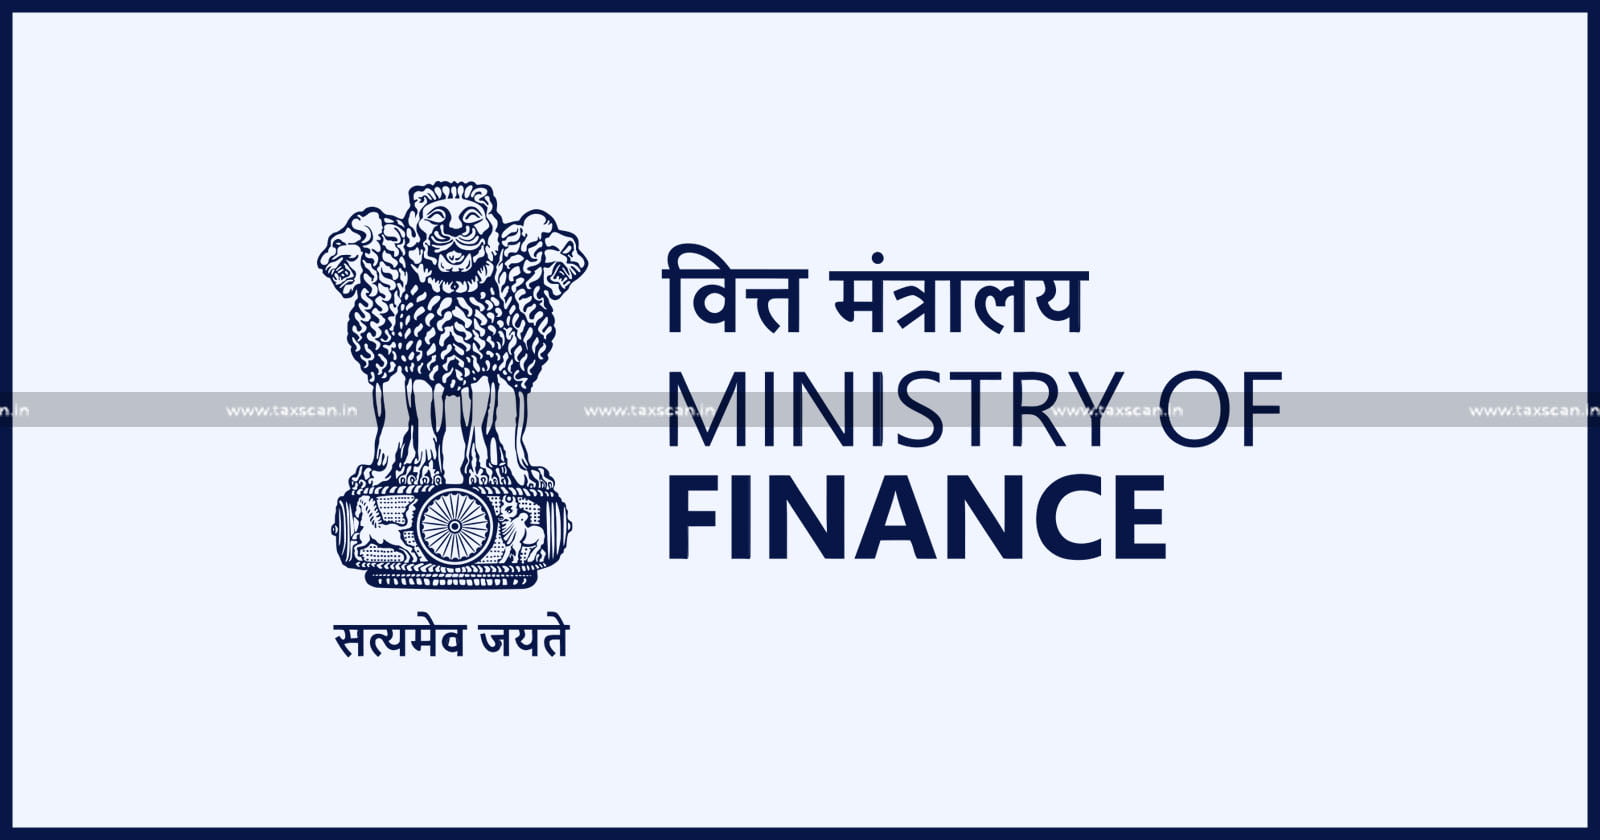 Finance Ministry - Private Finance Companies - Authentication - PMLA - Finance Ministry Permits new 6 Private Finance Companies - taxscan